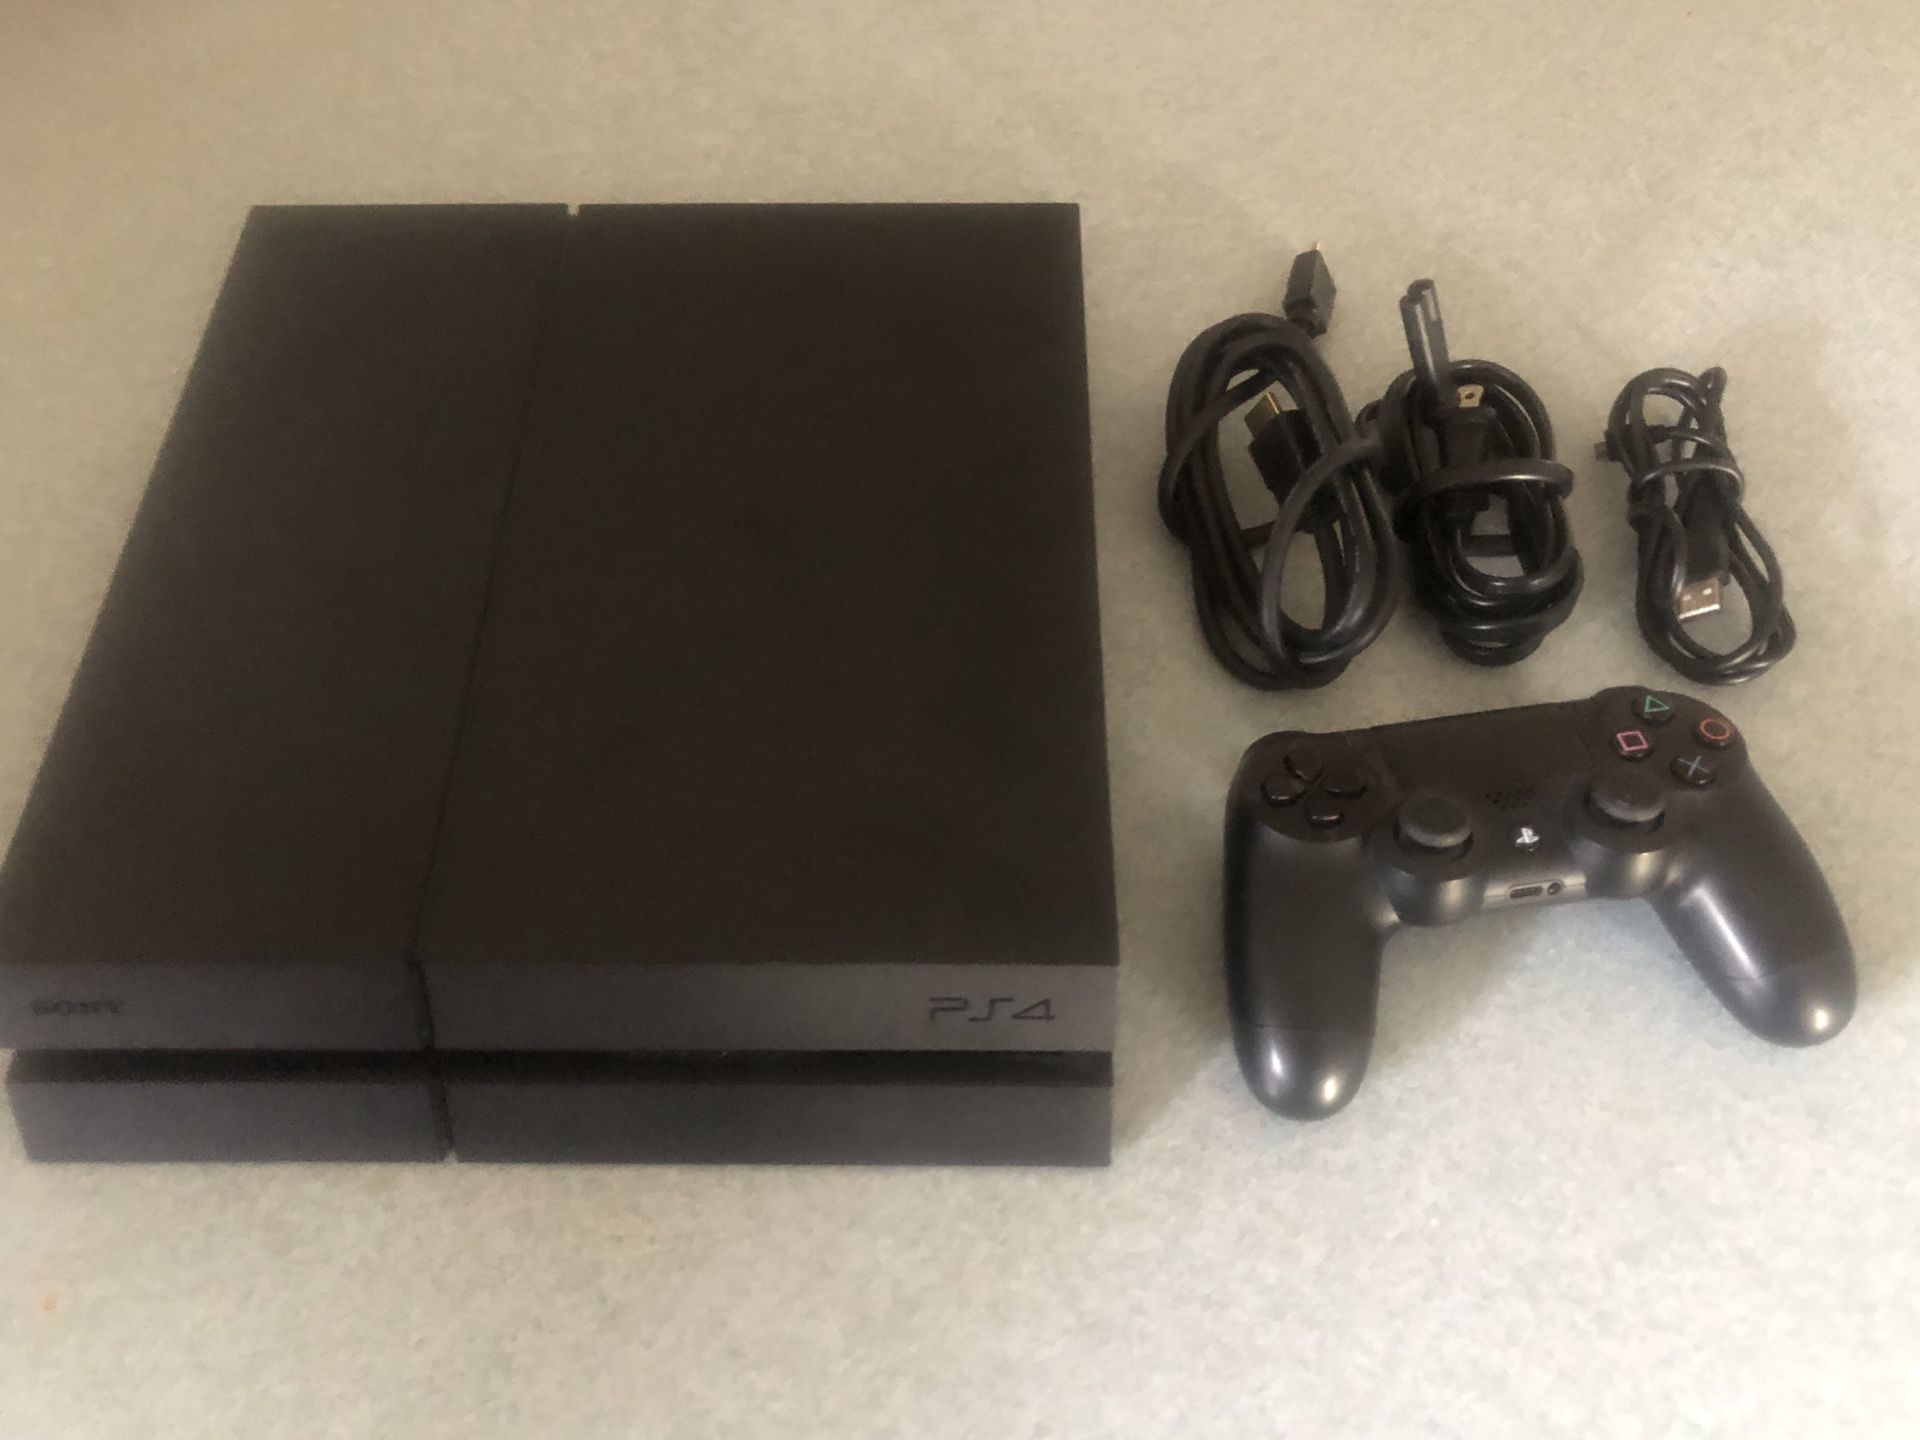 mikrofon Revolutionerende Arbejdsløs For Sale - Rarely used PlayStation 4 500gb Gaming Console PS4 for Sale in  Old Saybrook, CT - OfferUp